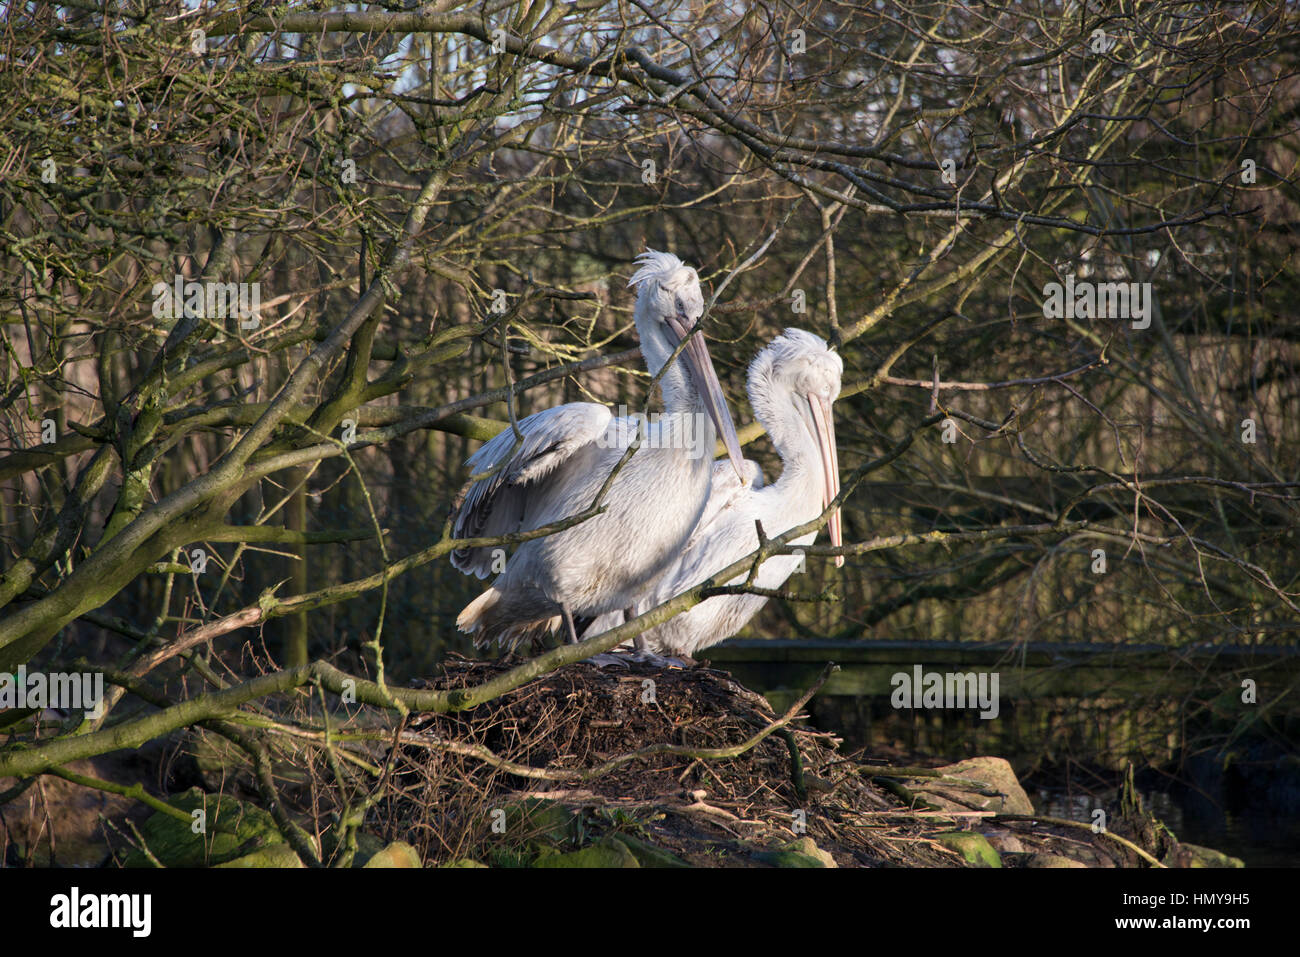 Two pelicans in sat on a nest in a zoo in England Stock Photo